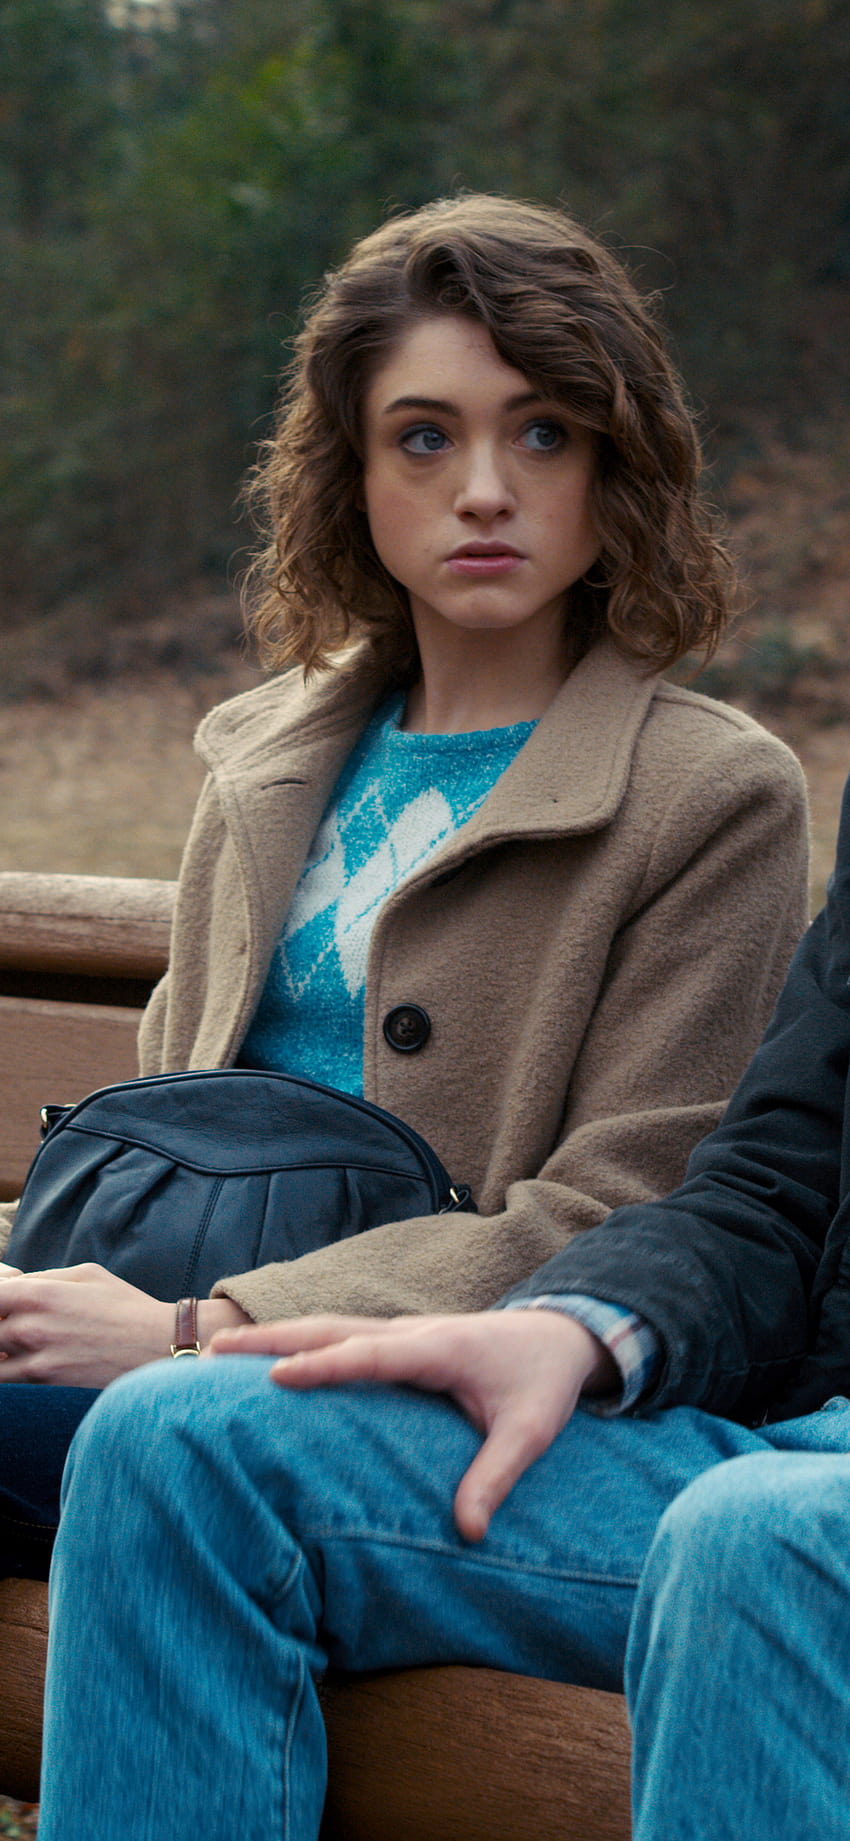 1125x2436 Stranger Things Natalia Dyer As Nancy Jonathan Byers As Charlie Iphone XS,Iphone 10,Iphone X , Backgrounds, and, natalia dyer stranger things HD phone wallpaper